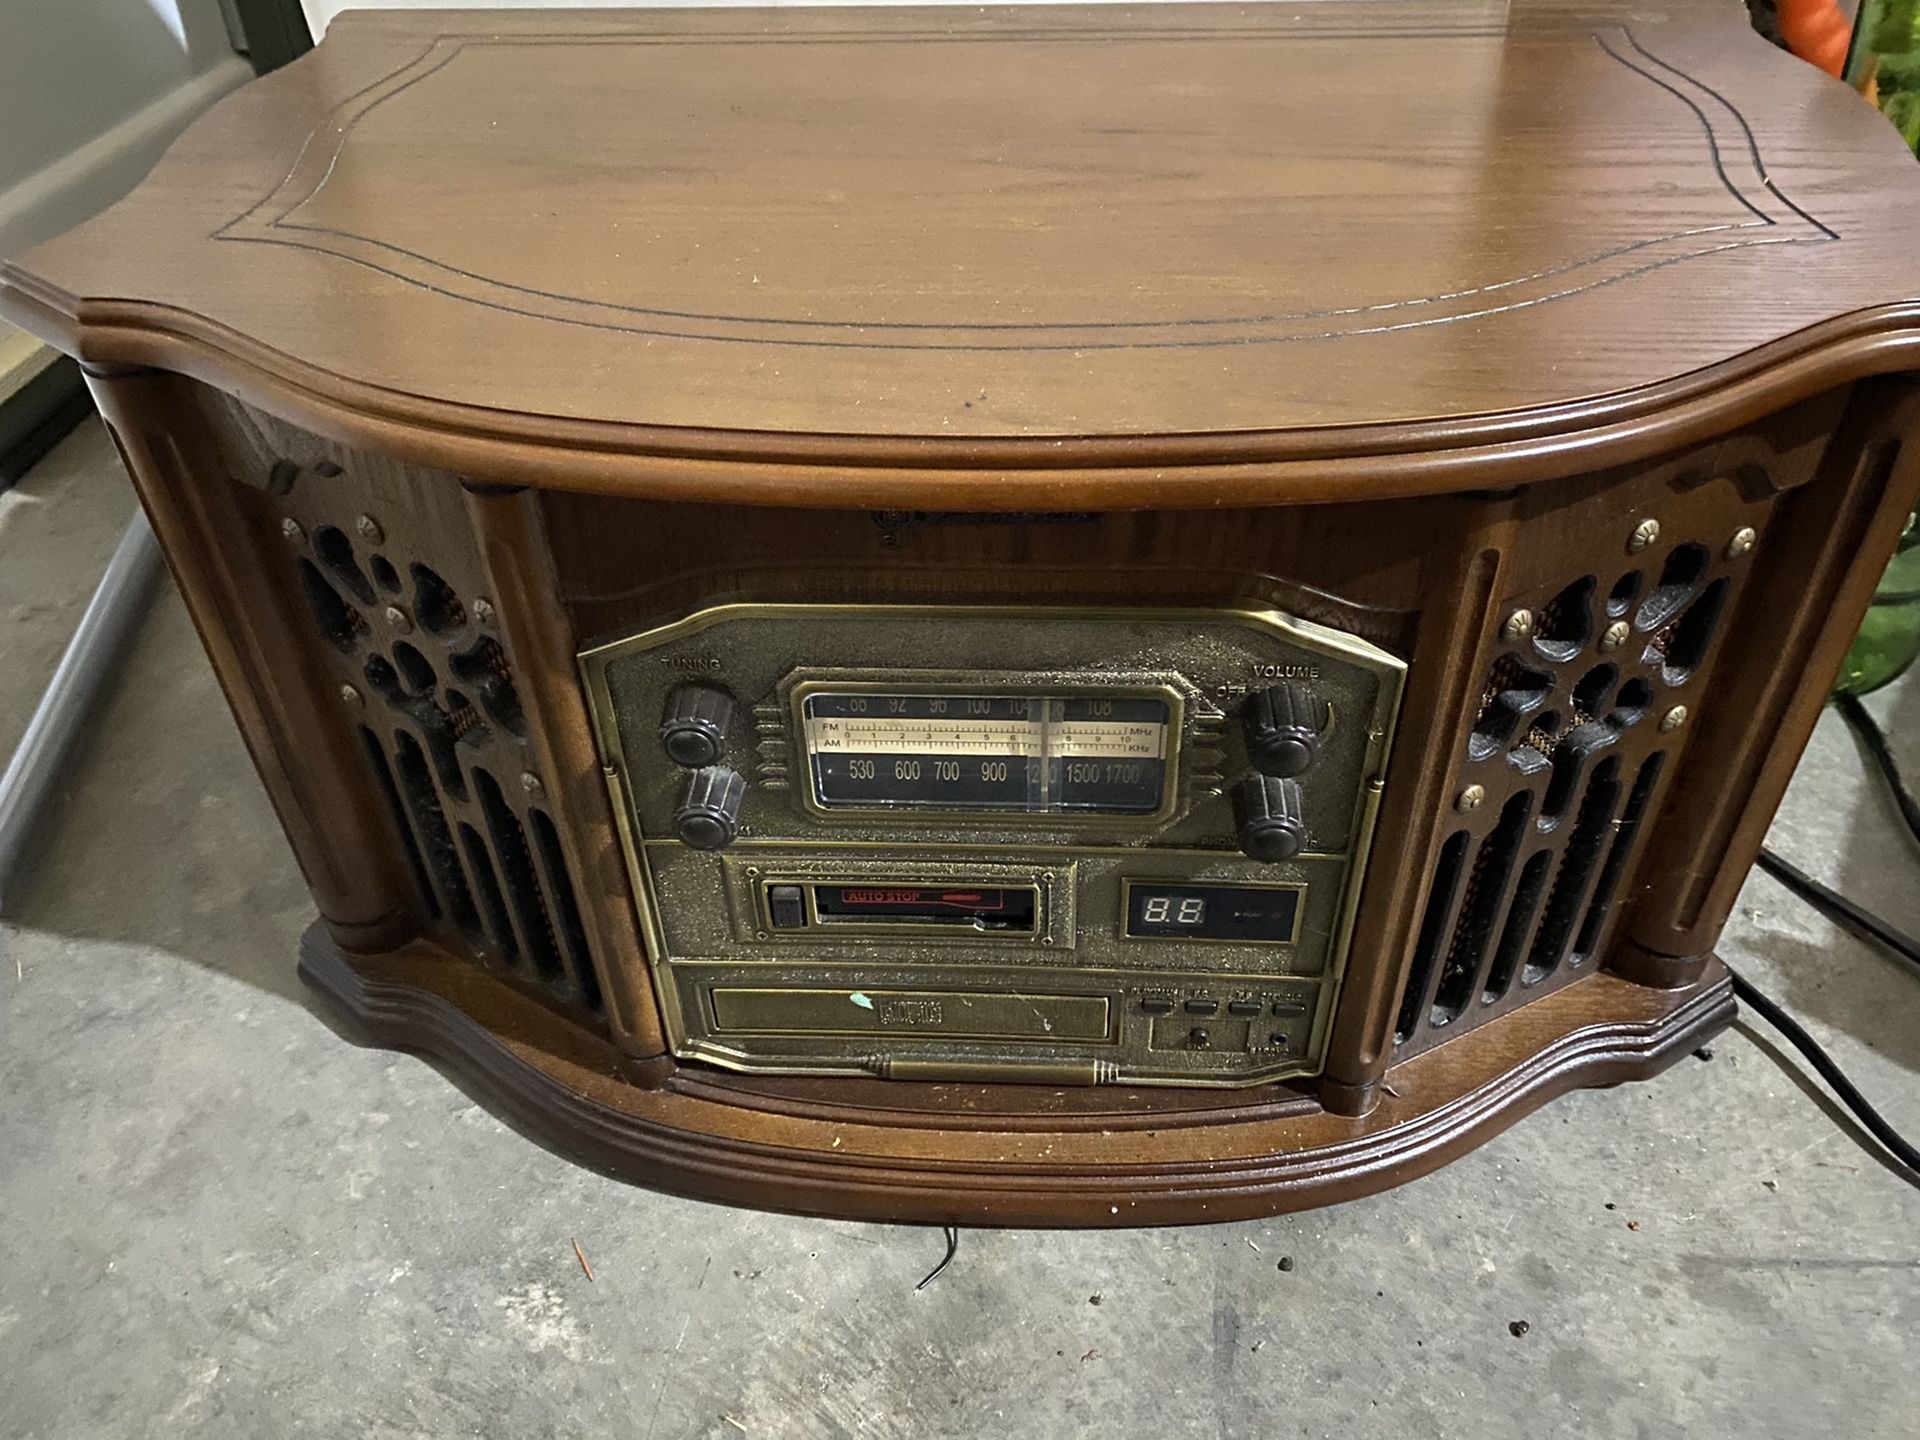 Antique record player